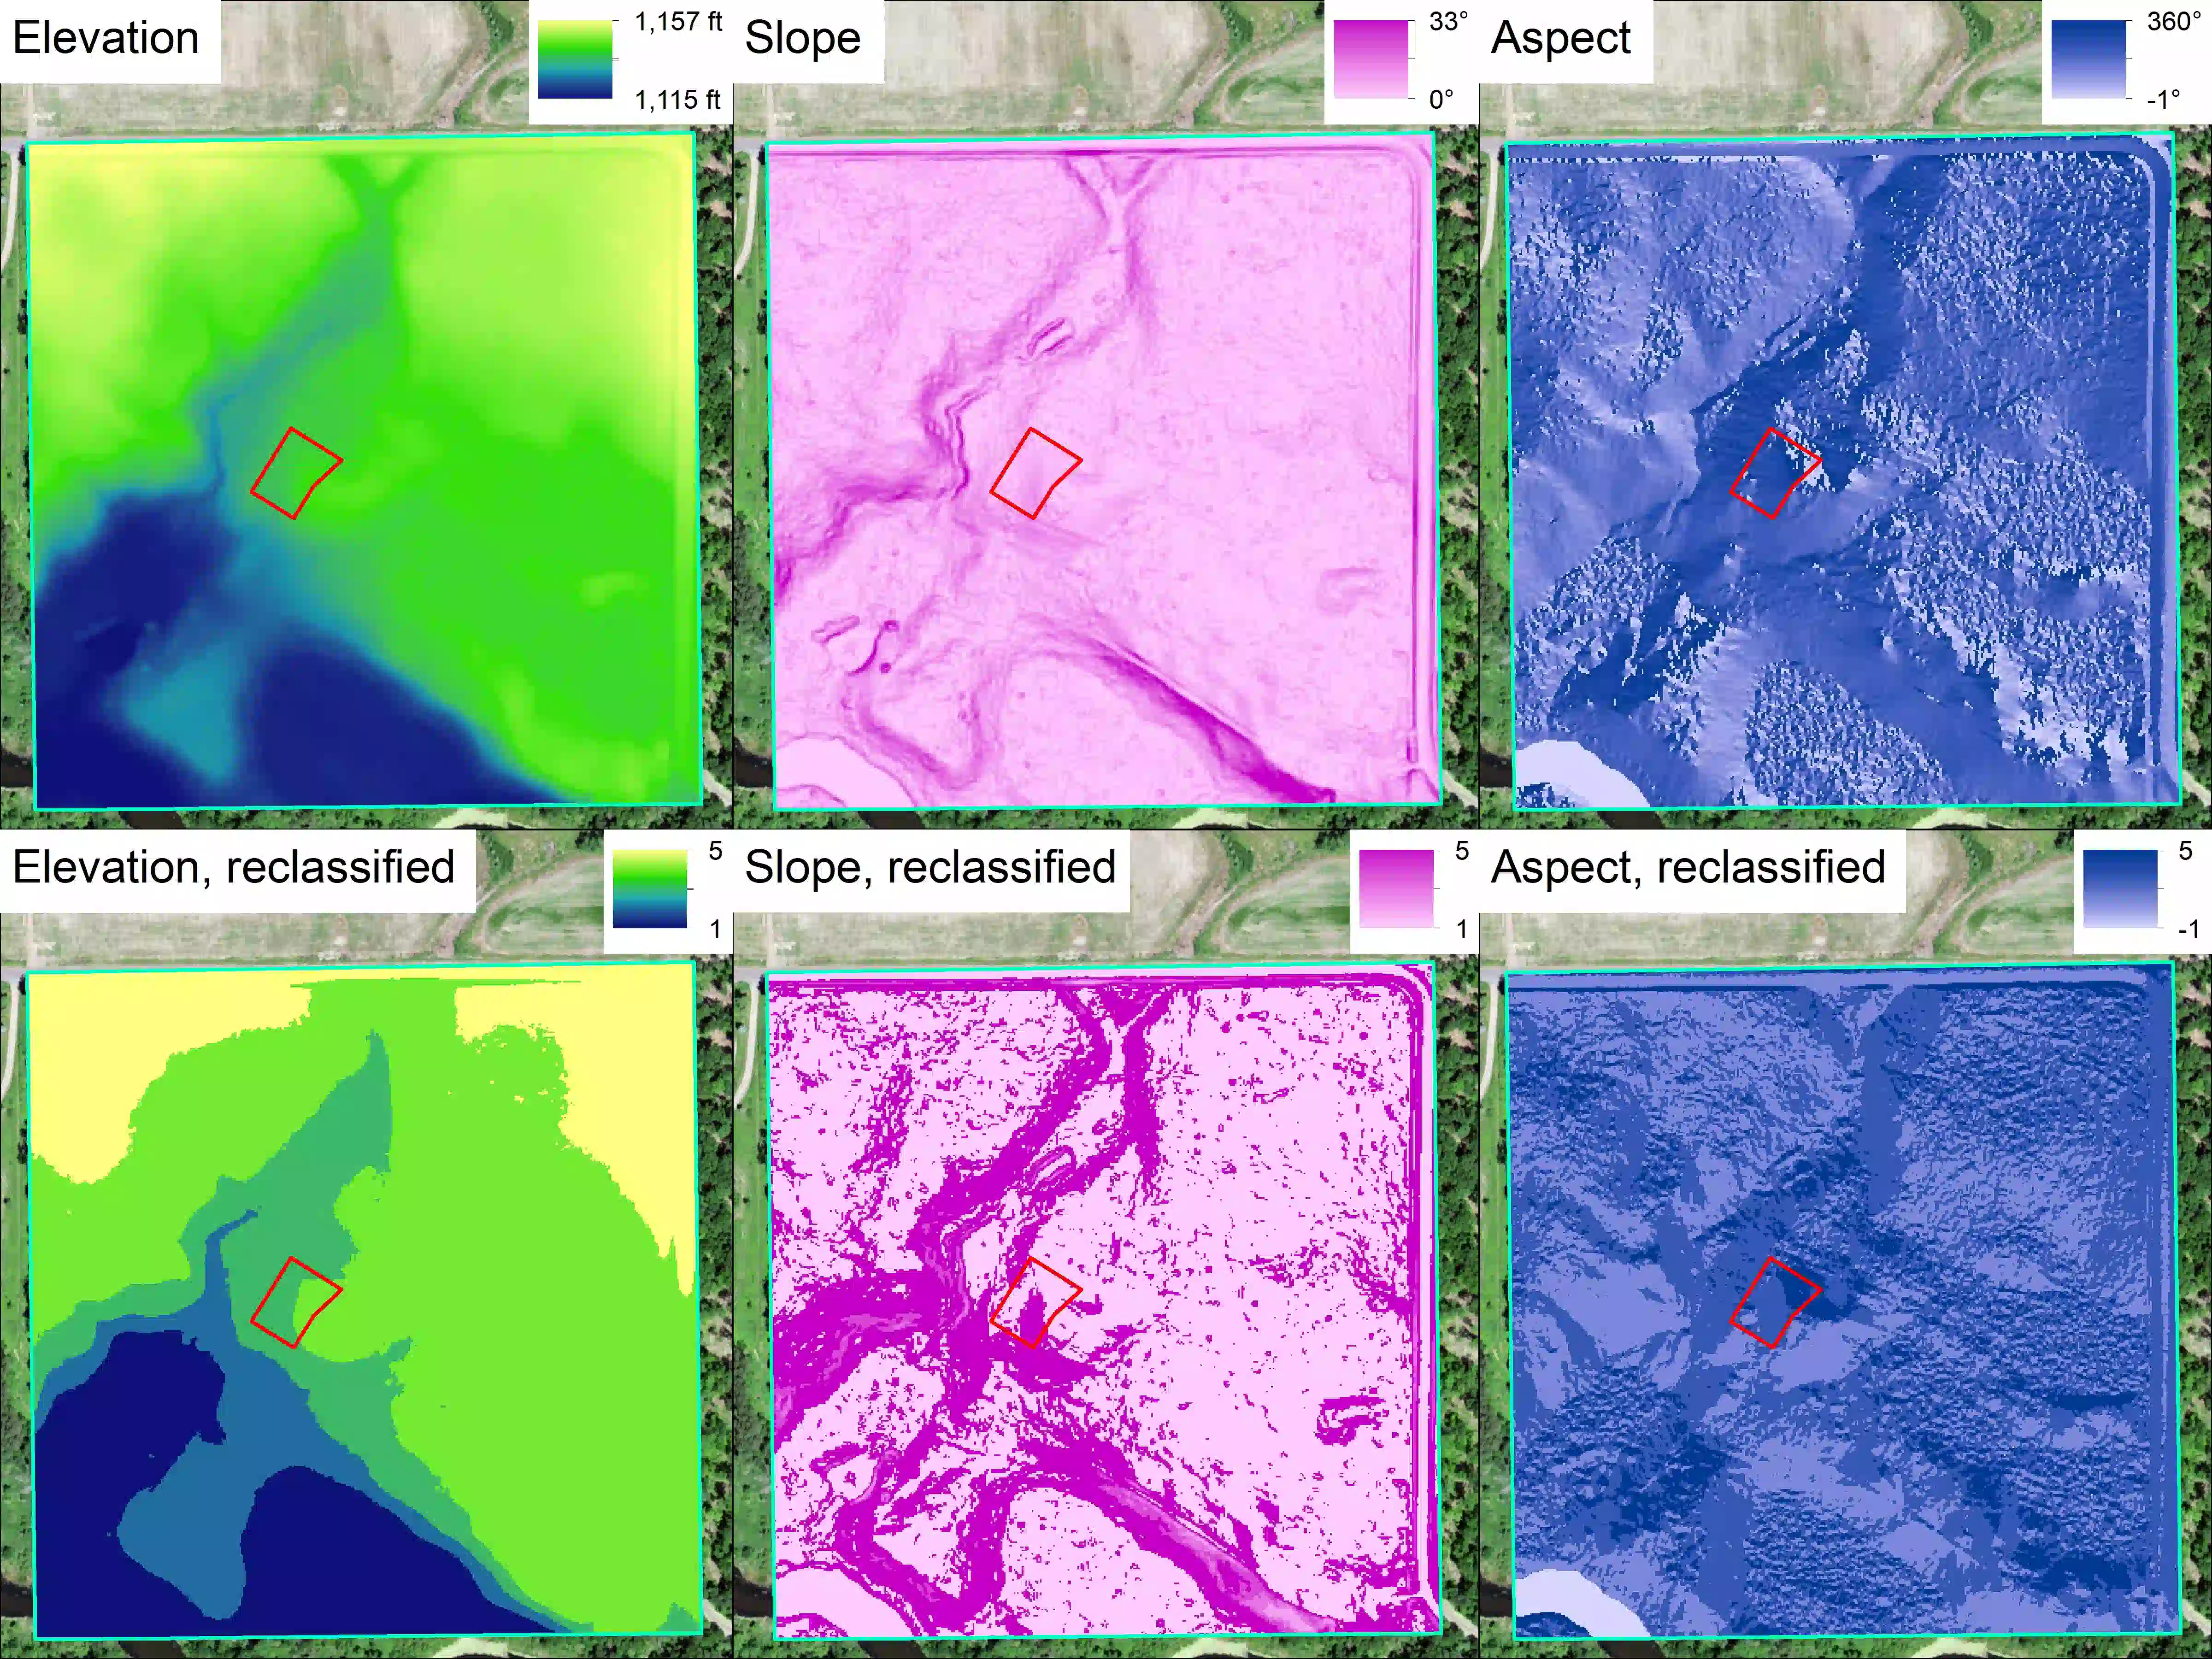 Six images displayed in a 2-by-3 grid. Top left images displays elevation within the property, with lowest elevation in blue, highest in yellow-orange, and middling in lime green. Top middle image displays slope within the property, with low slopes as very light pink and high slopes as very dark pink. Top right image displays aspect, with low aspect as light blue and high aspect as dark blue. Below each is its respective reclassification using the same color schemes.